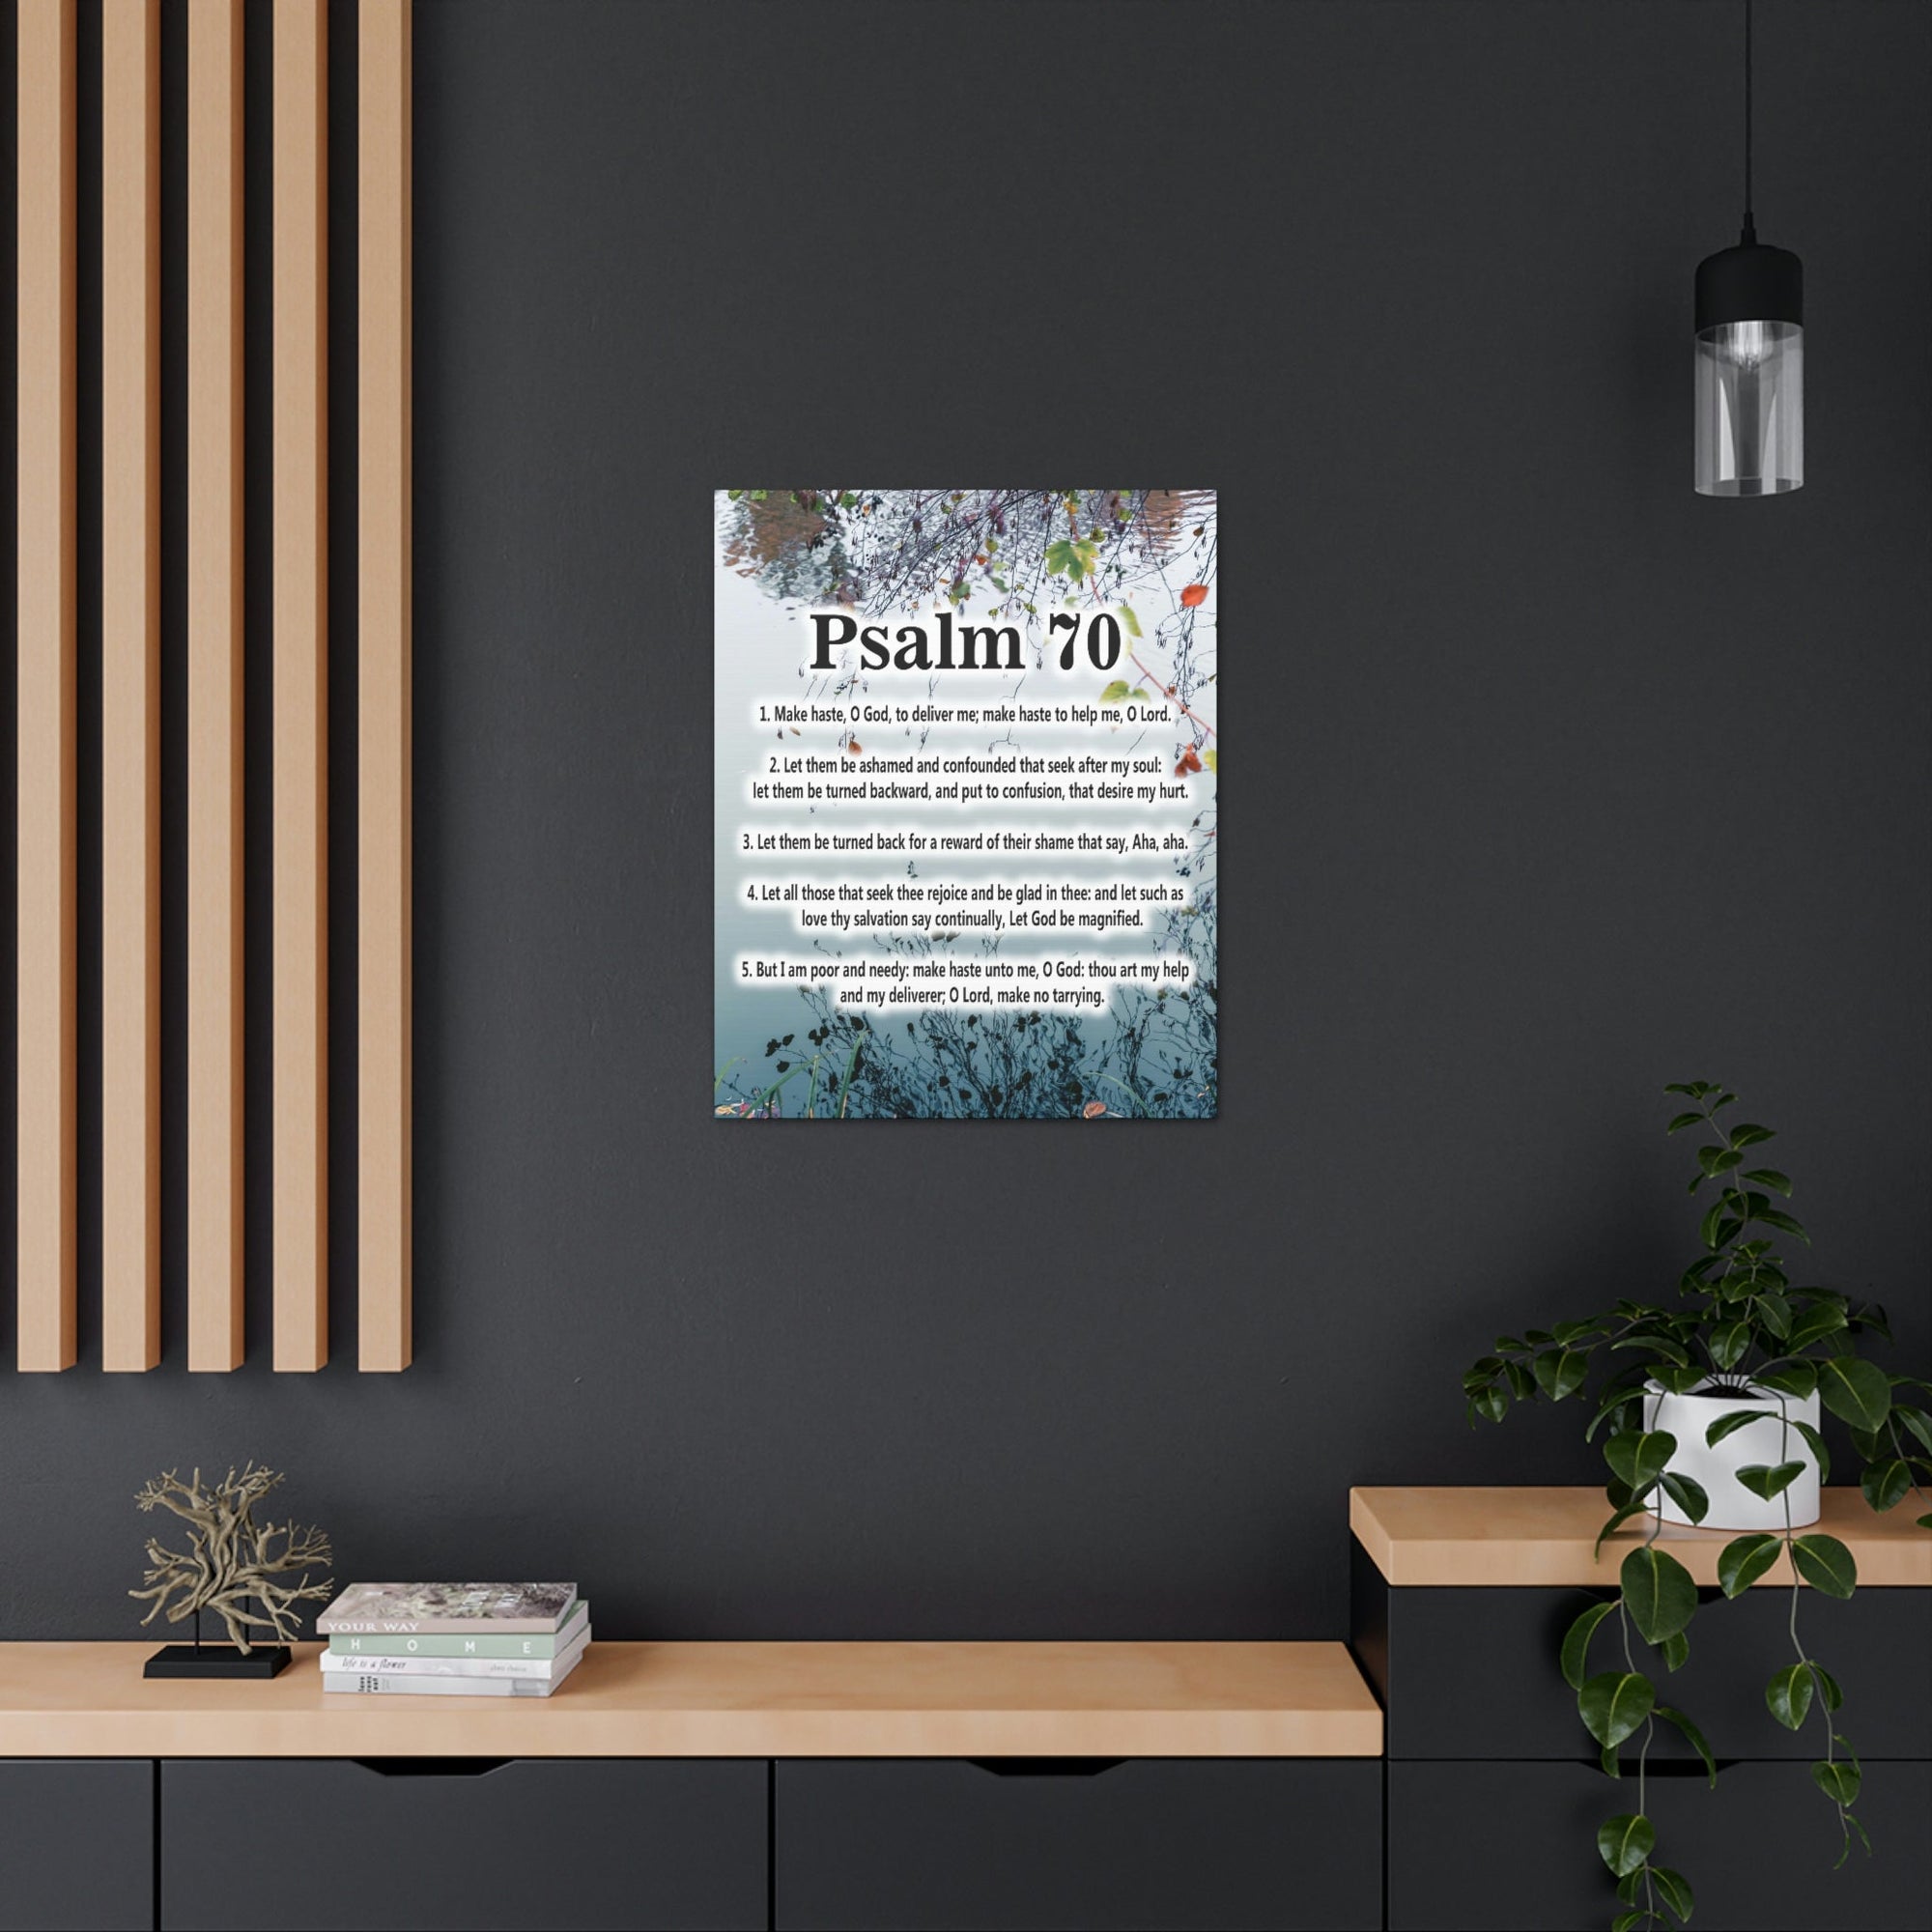 Scripture Walls Make Haste Psalm 70:1 Christian Wall Art Bible Verse Print Ready to Hang Unframed-Express Your Love Gifts